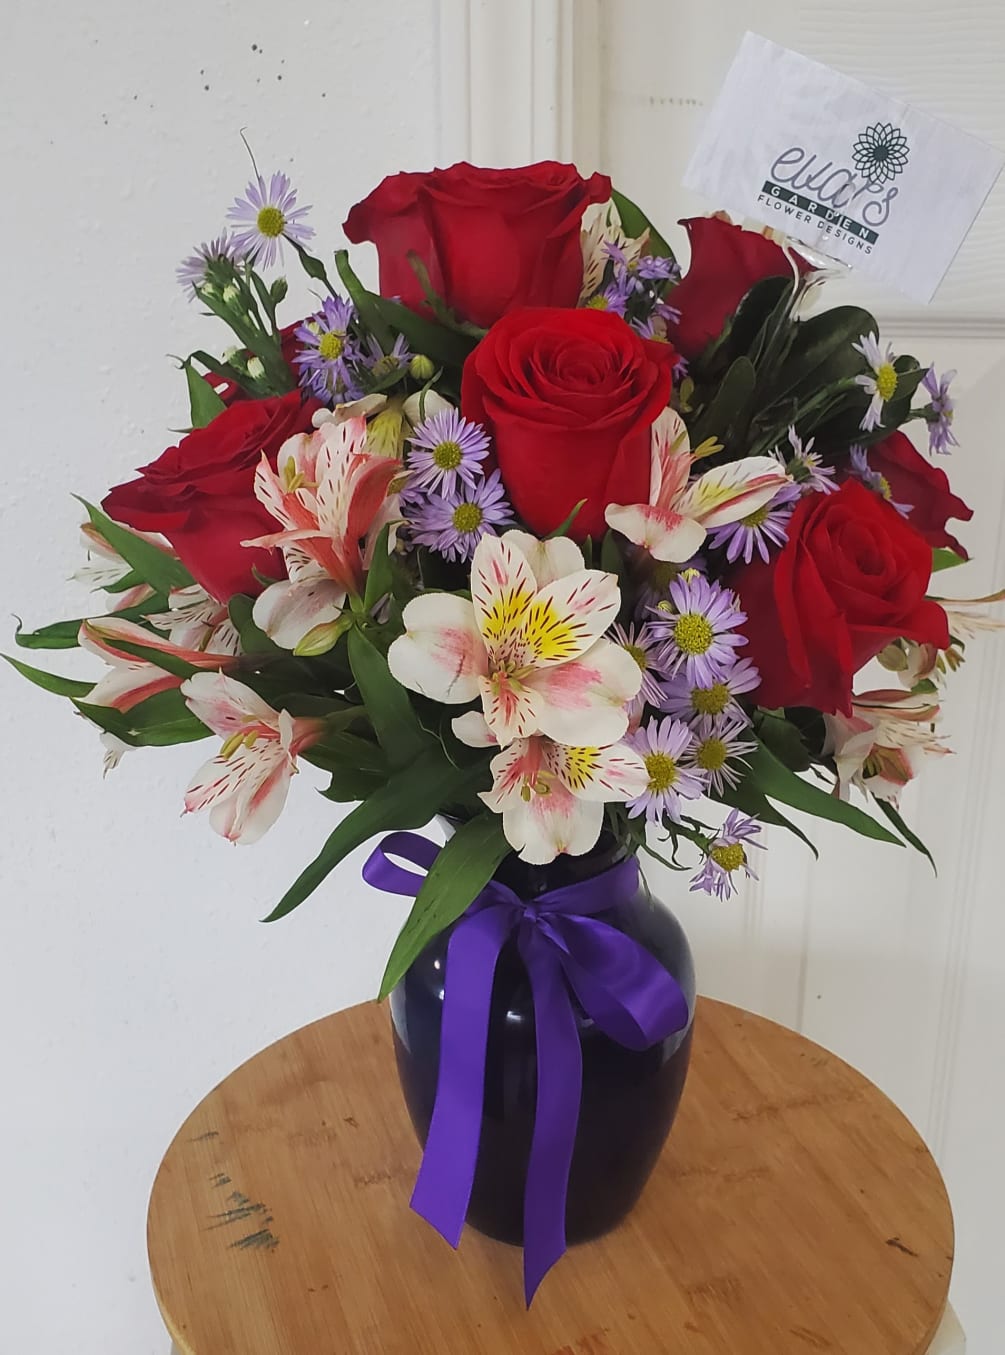 Beautiful blue crystal vase with 9 red roses, various stems of alstroemeria